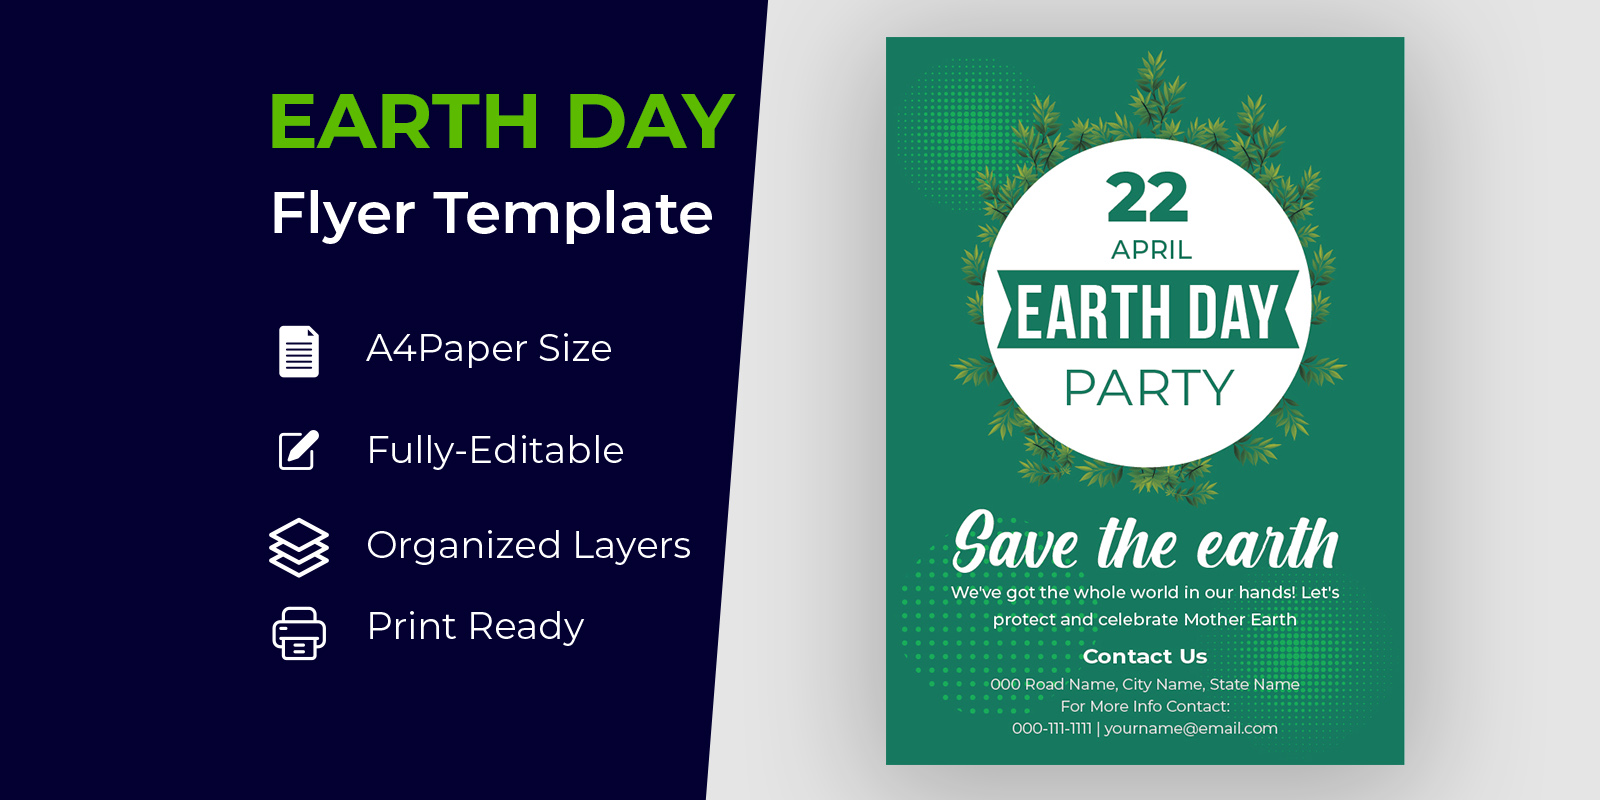 Earth Day Natural Flyer Design Corporate identity template